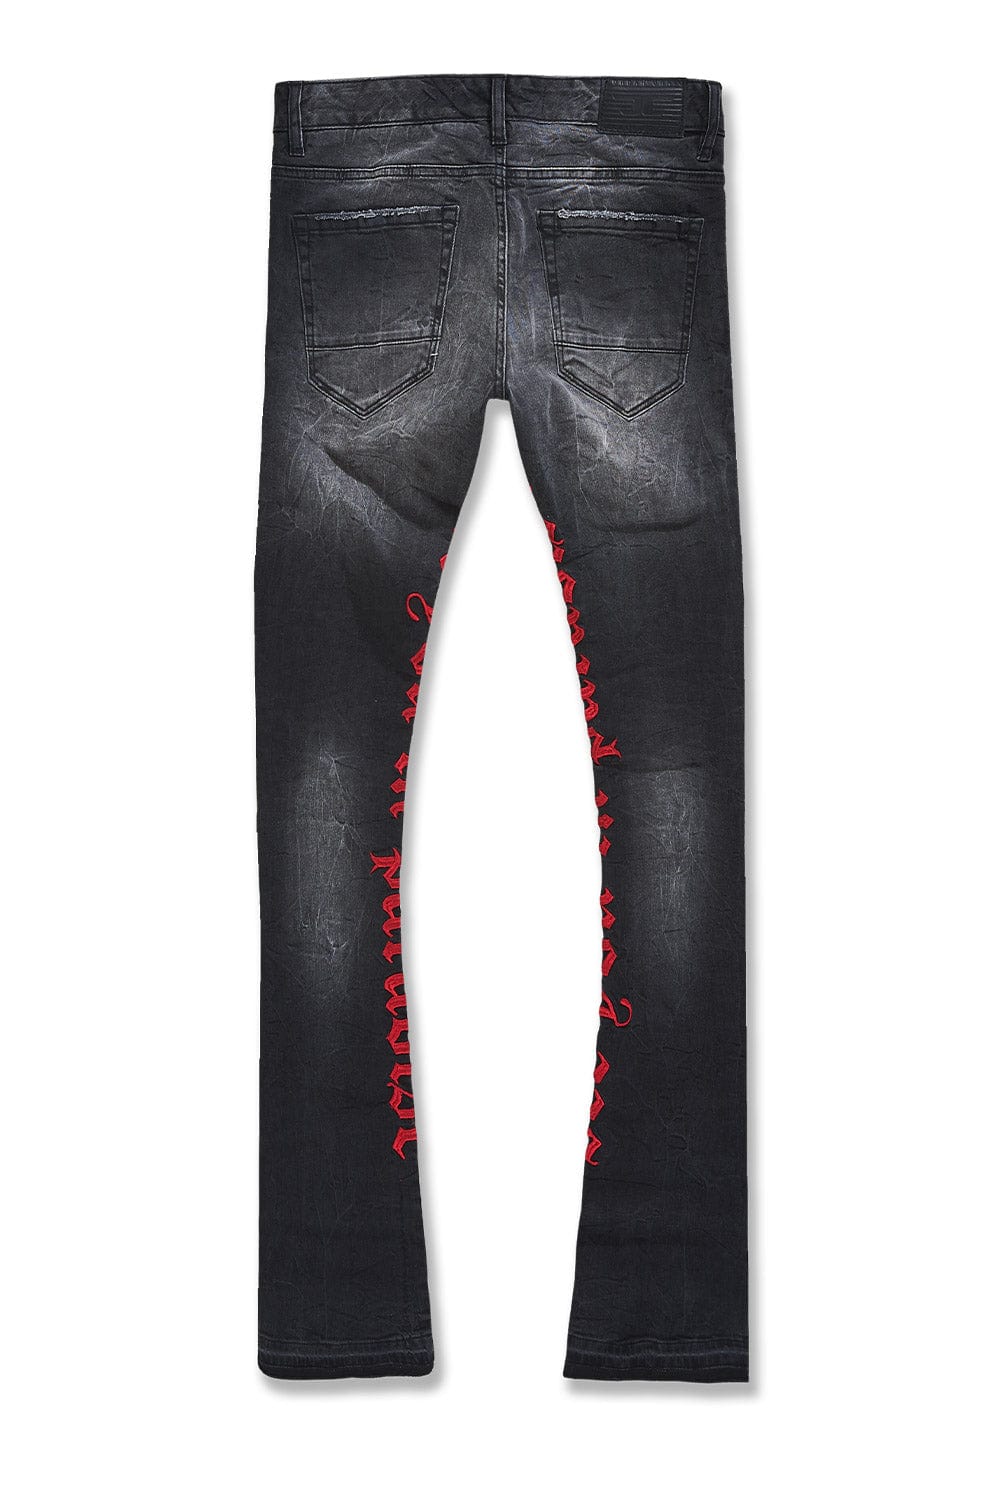 Jordan Craig See You In Paradise Black Stacked Jeans